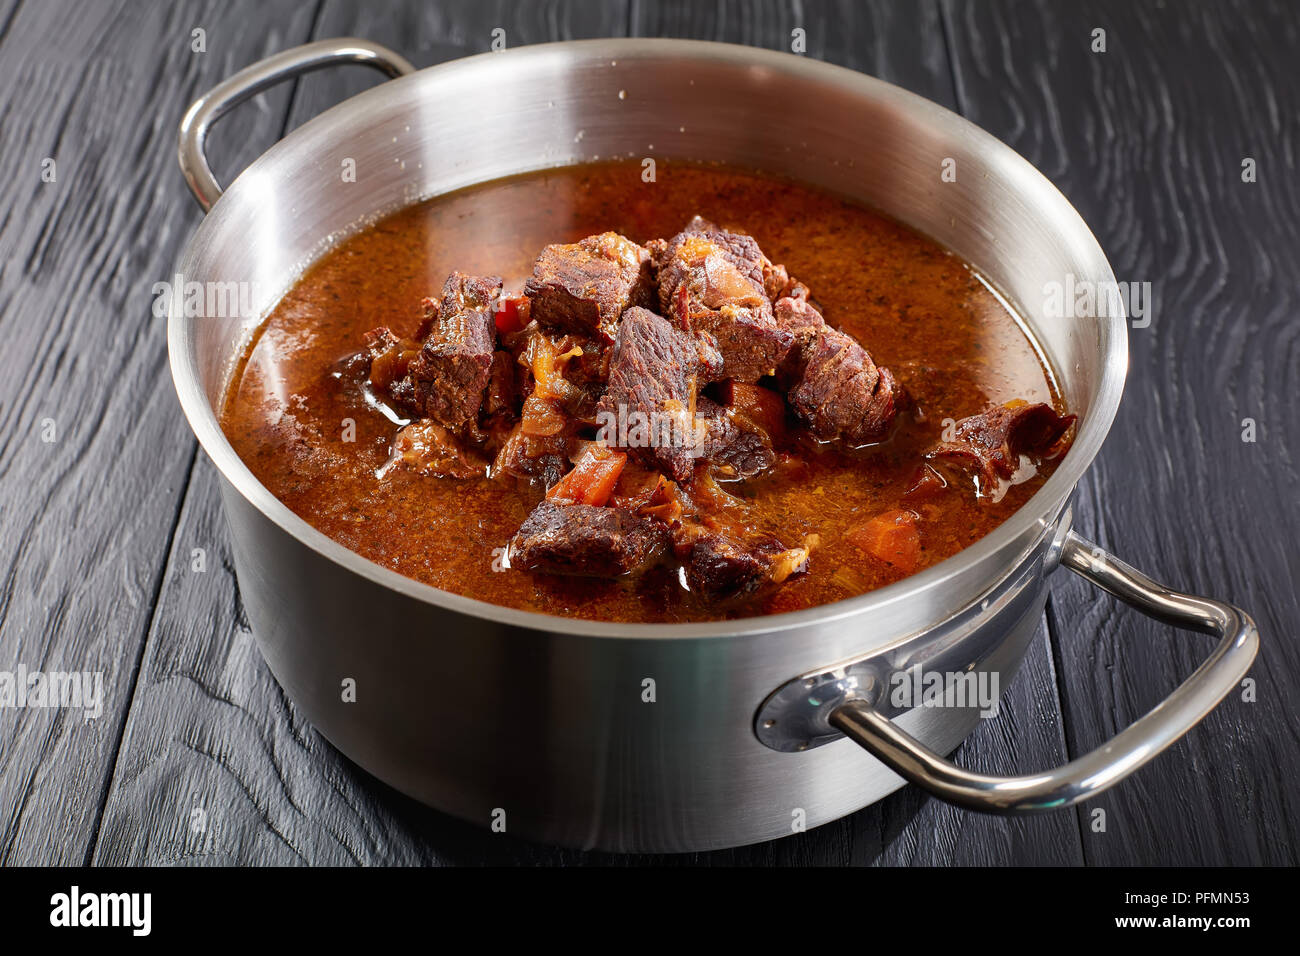 close-up of delicious homemade hot traditional Czech beef goulash in a stainless pan on black wooden table, view from above Stock Photo